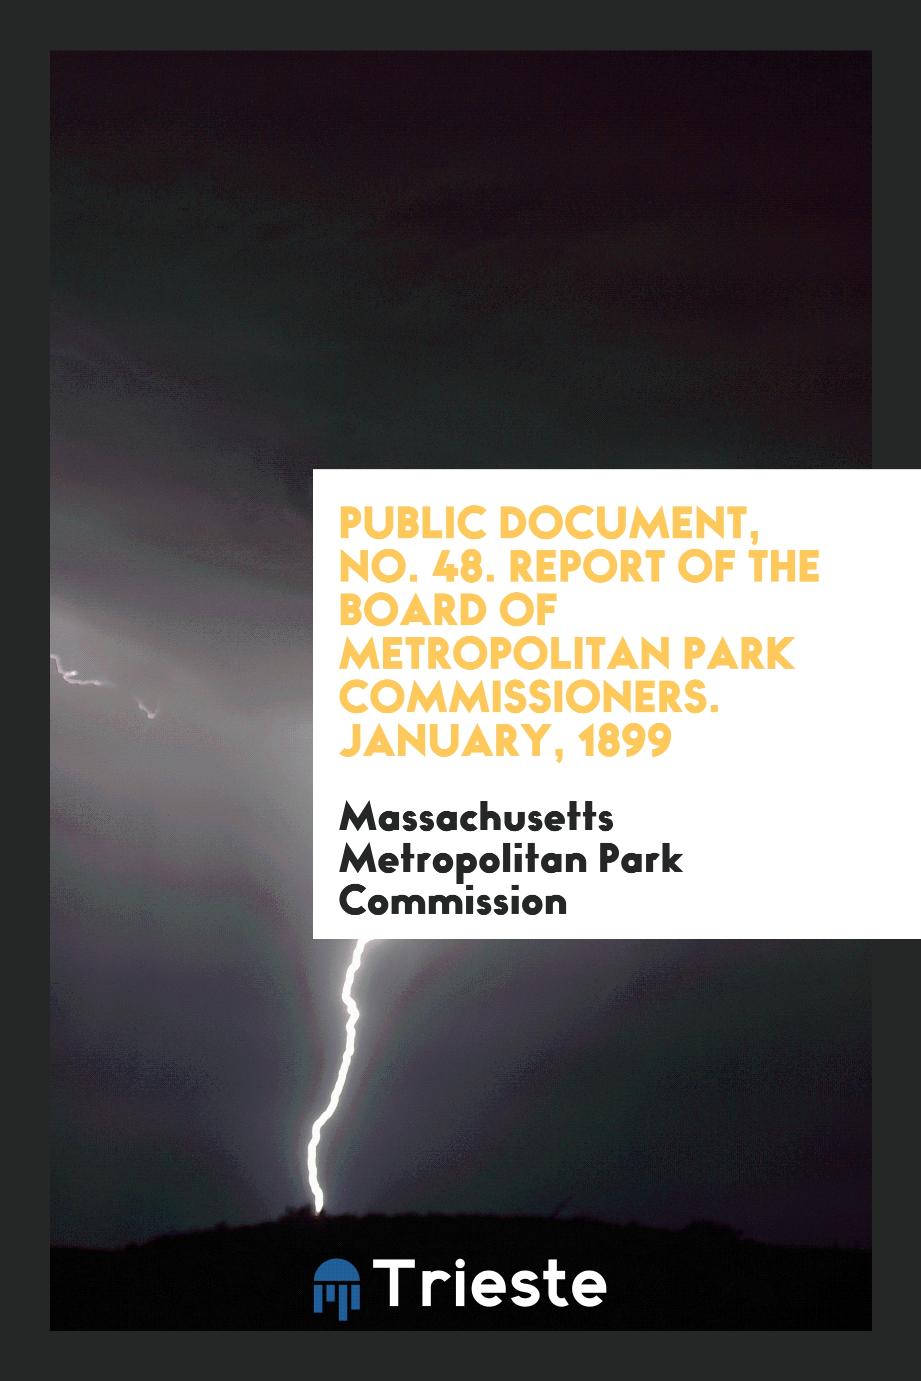 Public Document, No. 48. Report of the Board of Metropolitan Park Commissioners. January, 1899